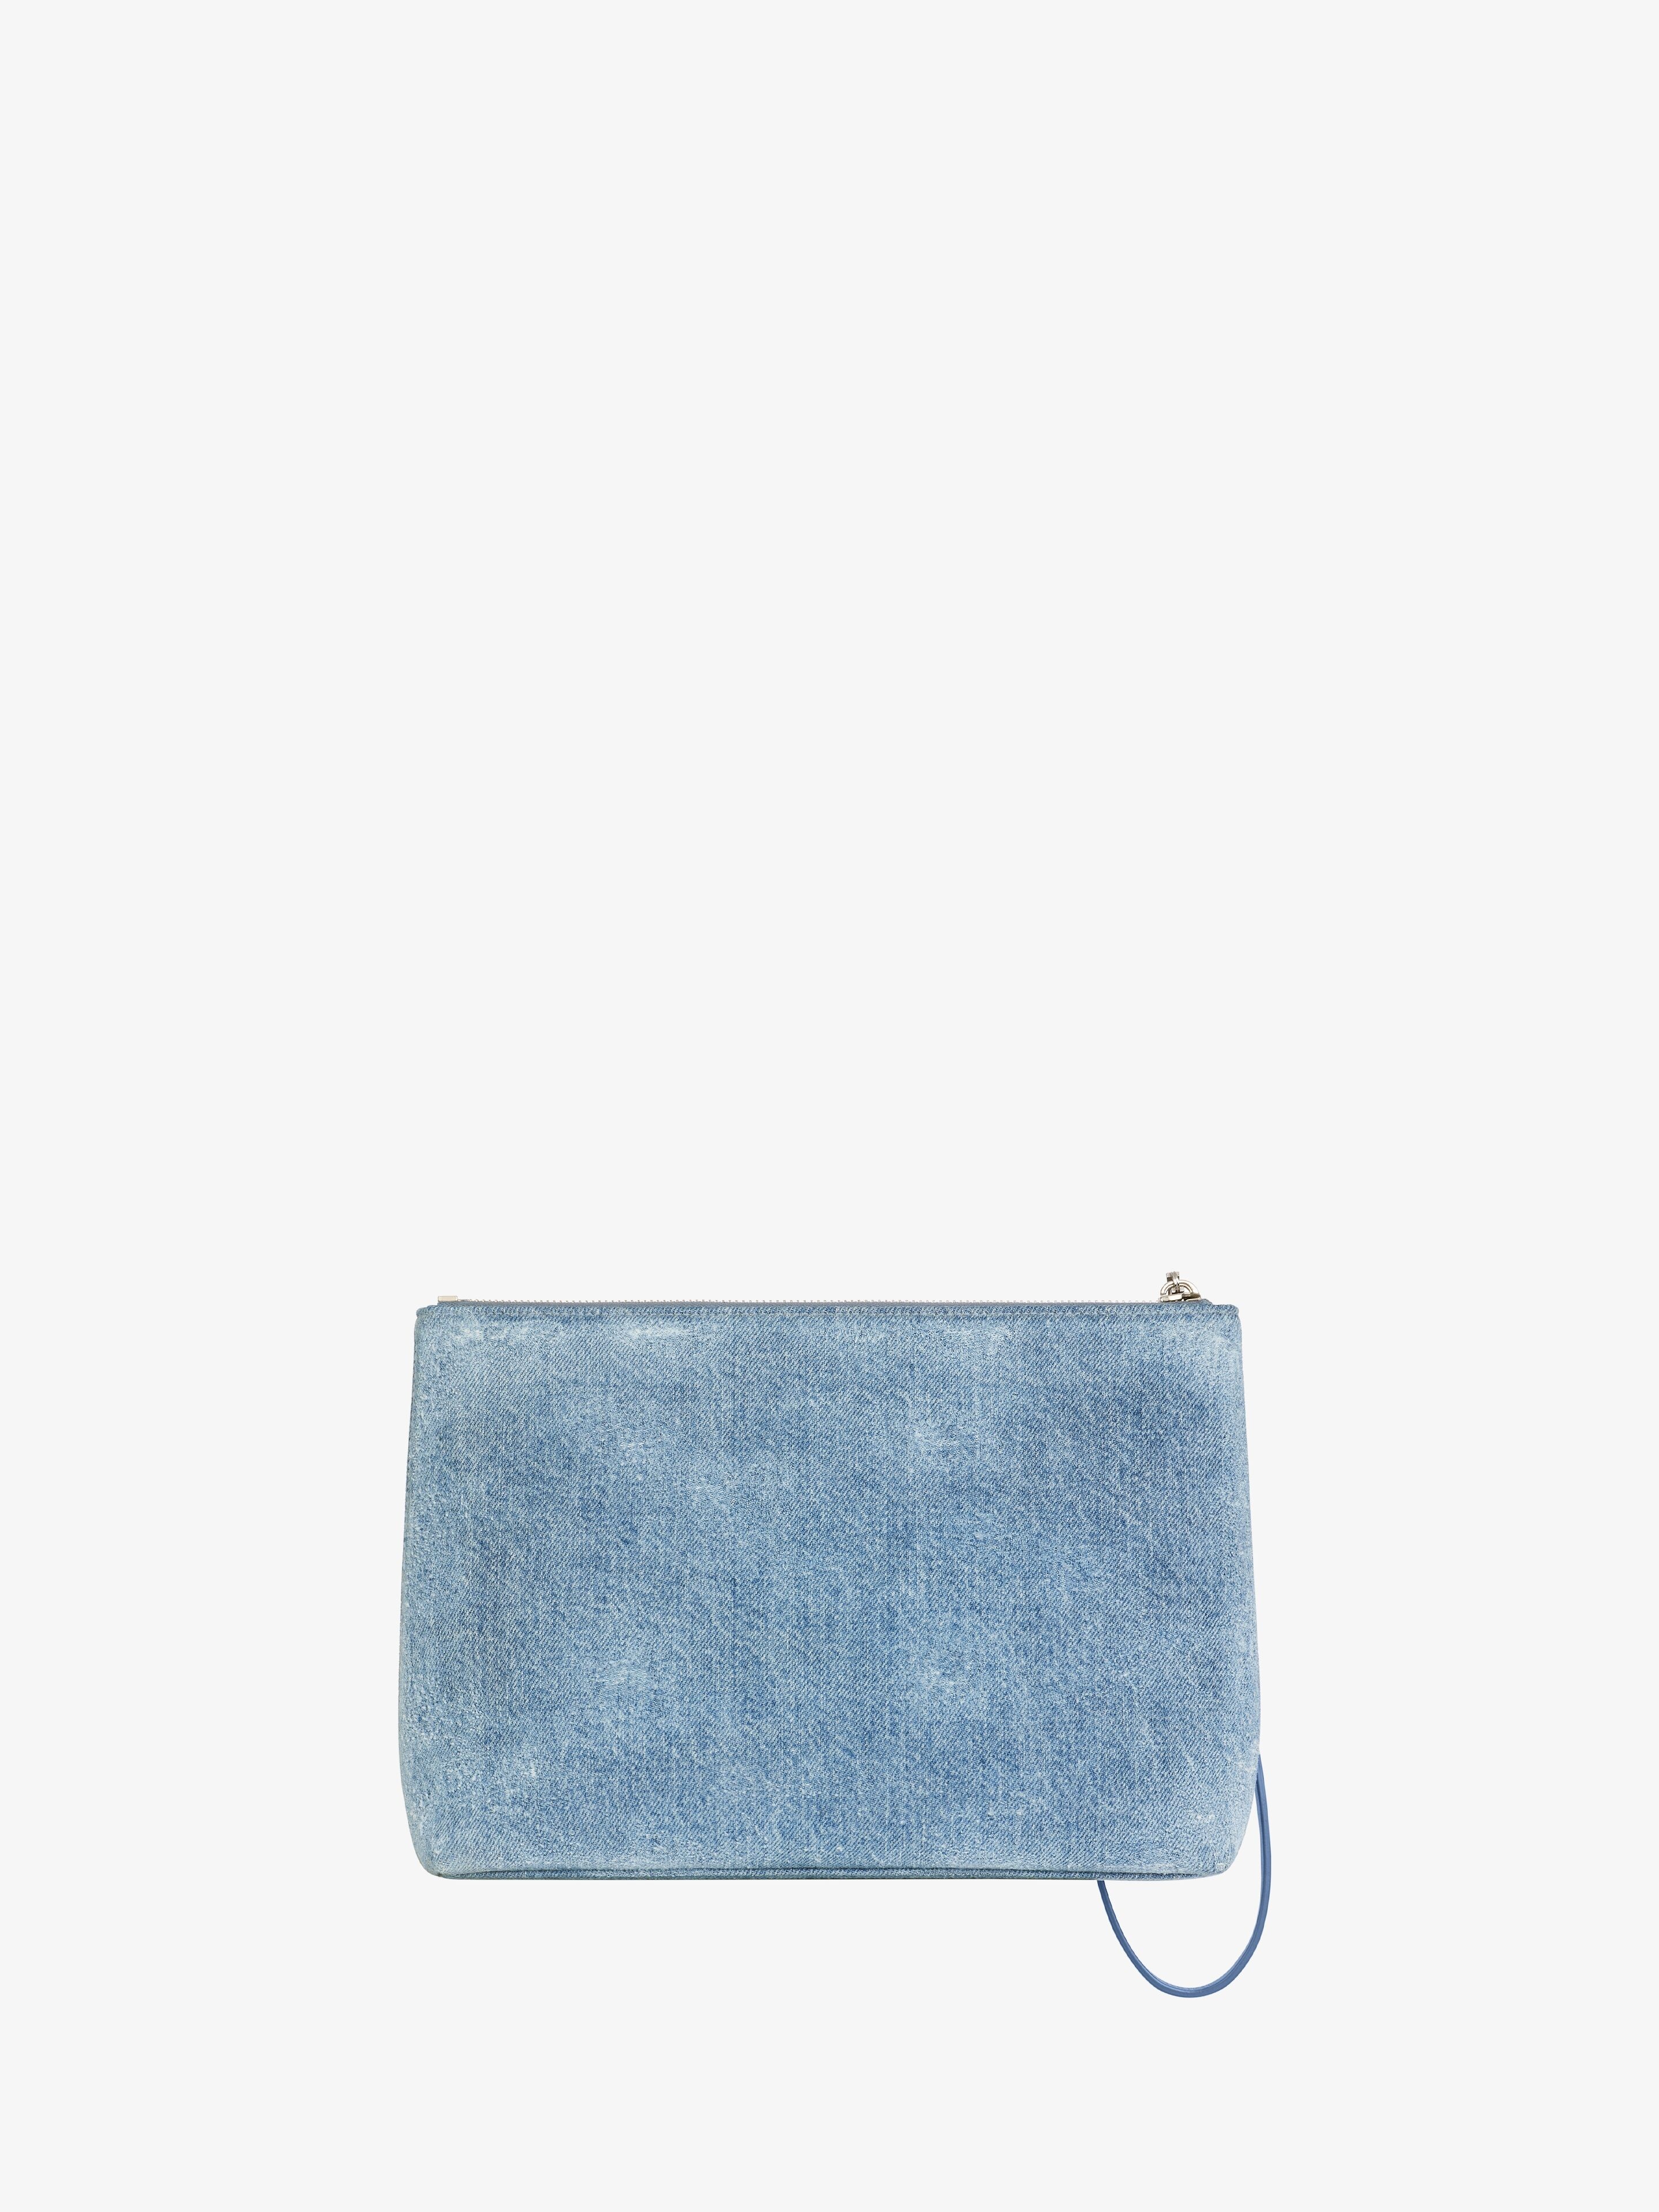 GIVENCHY TRAVEL POUCH IN DENIM - 3